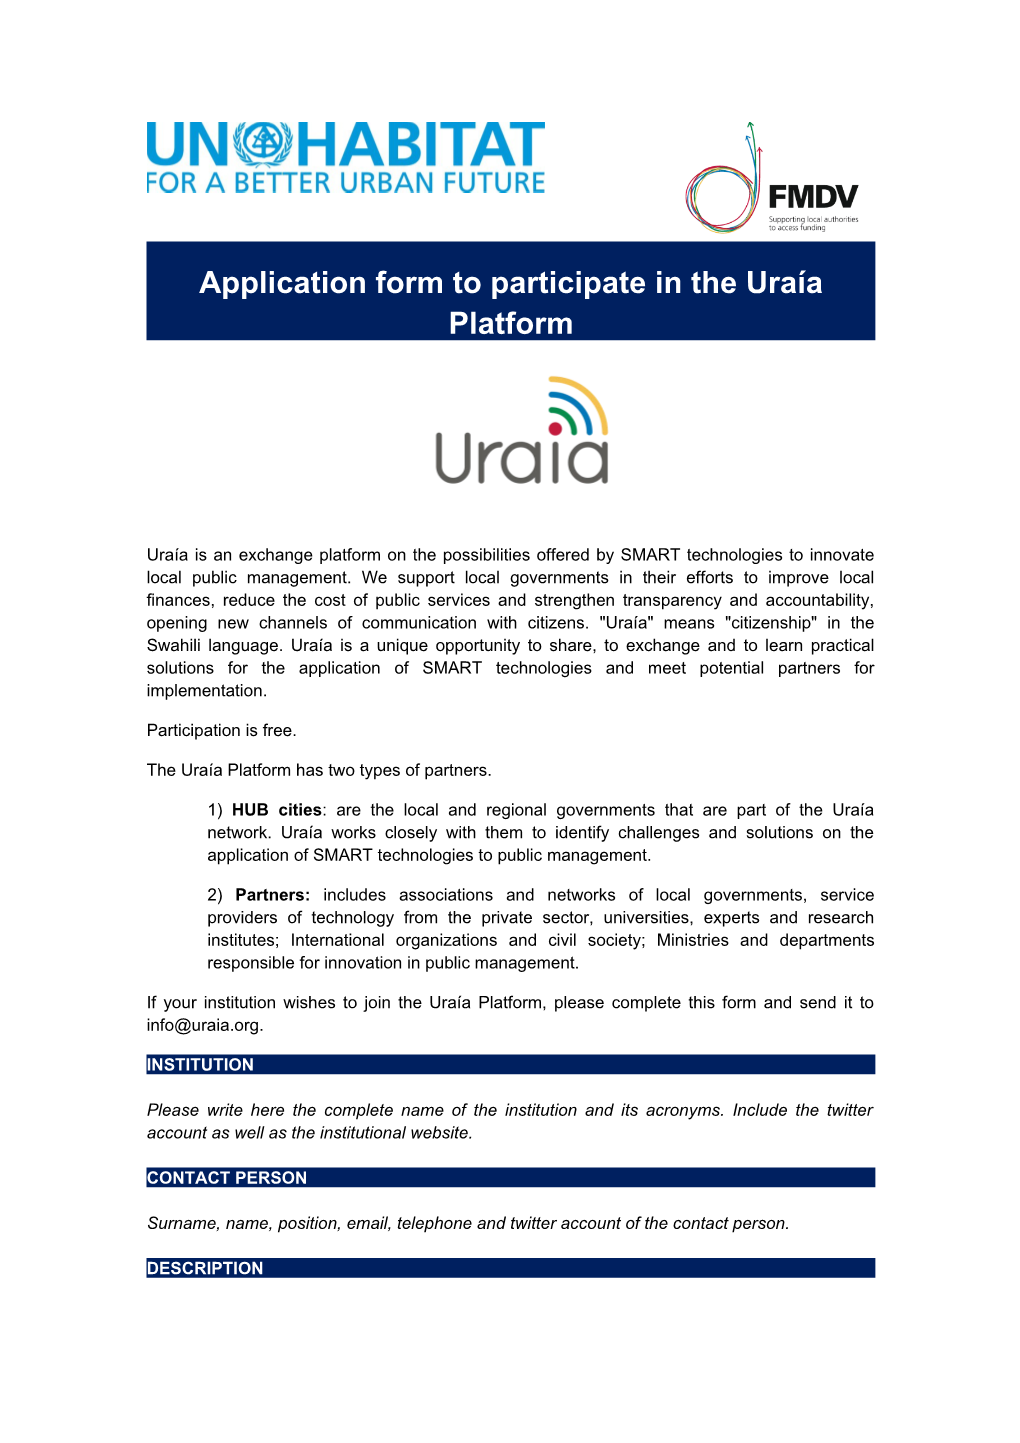 Application Form to Participate in the Uraía Platform